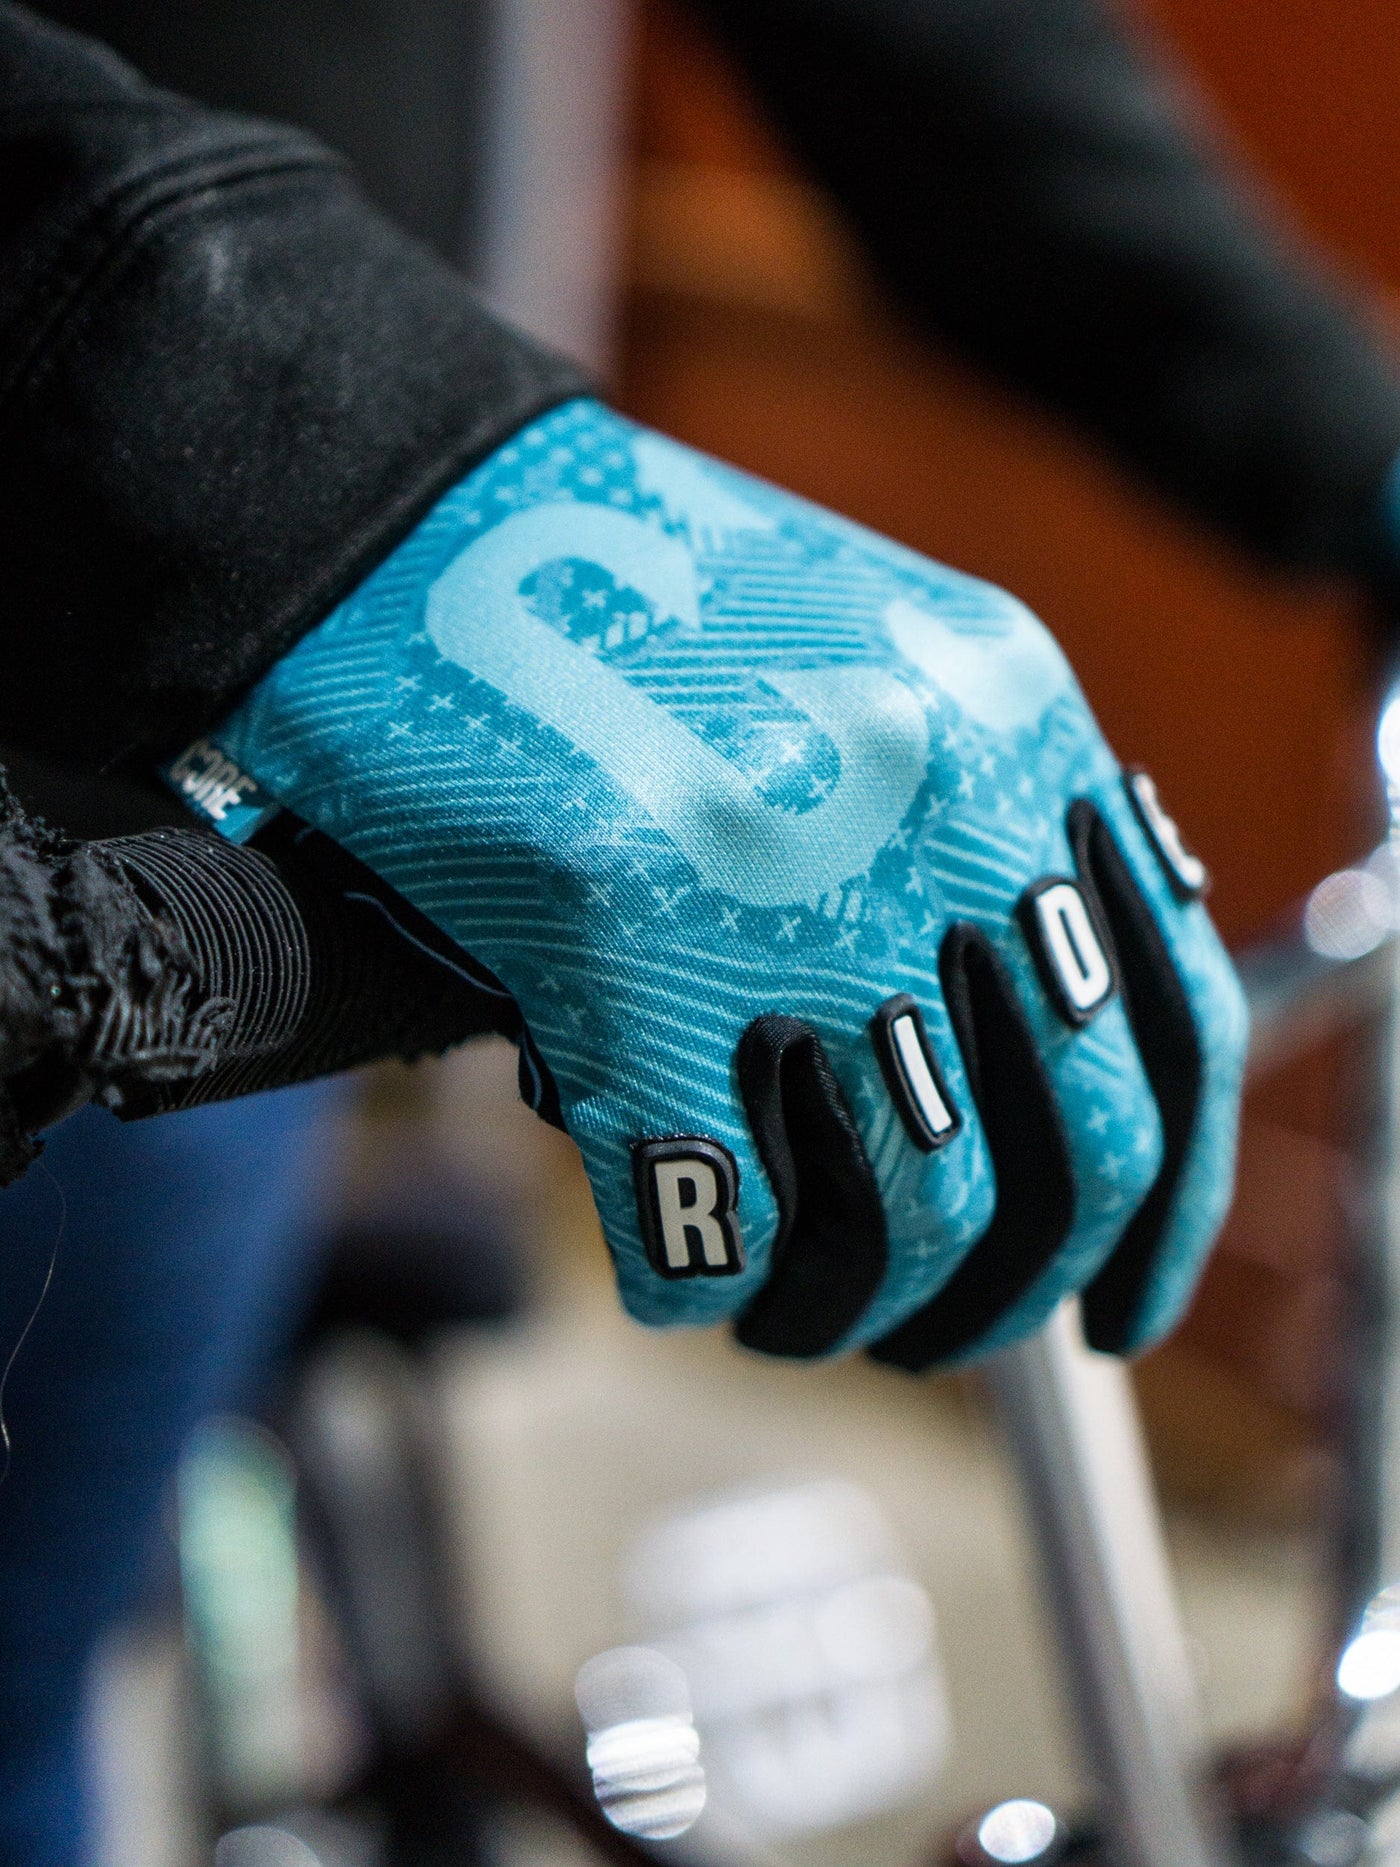 CORE Protection BMX Gloves Teal I Bike Gloves Zoomed in Product in Use